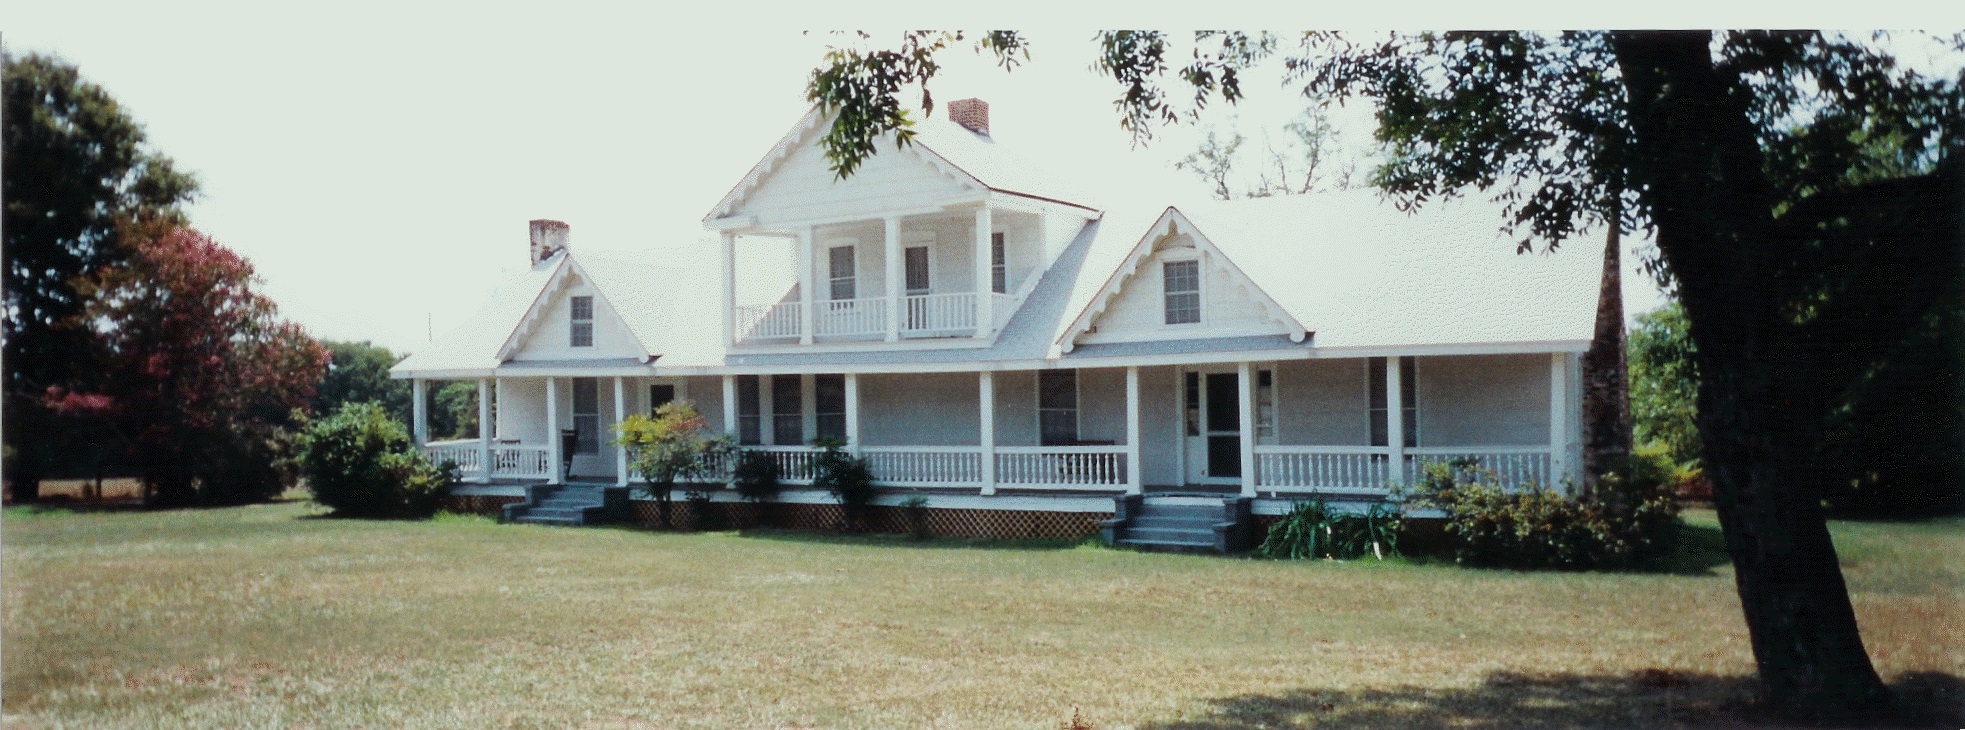 ENLARGEABLE IMAGE OF THE HOUSE IN CA. 1975